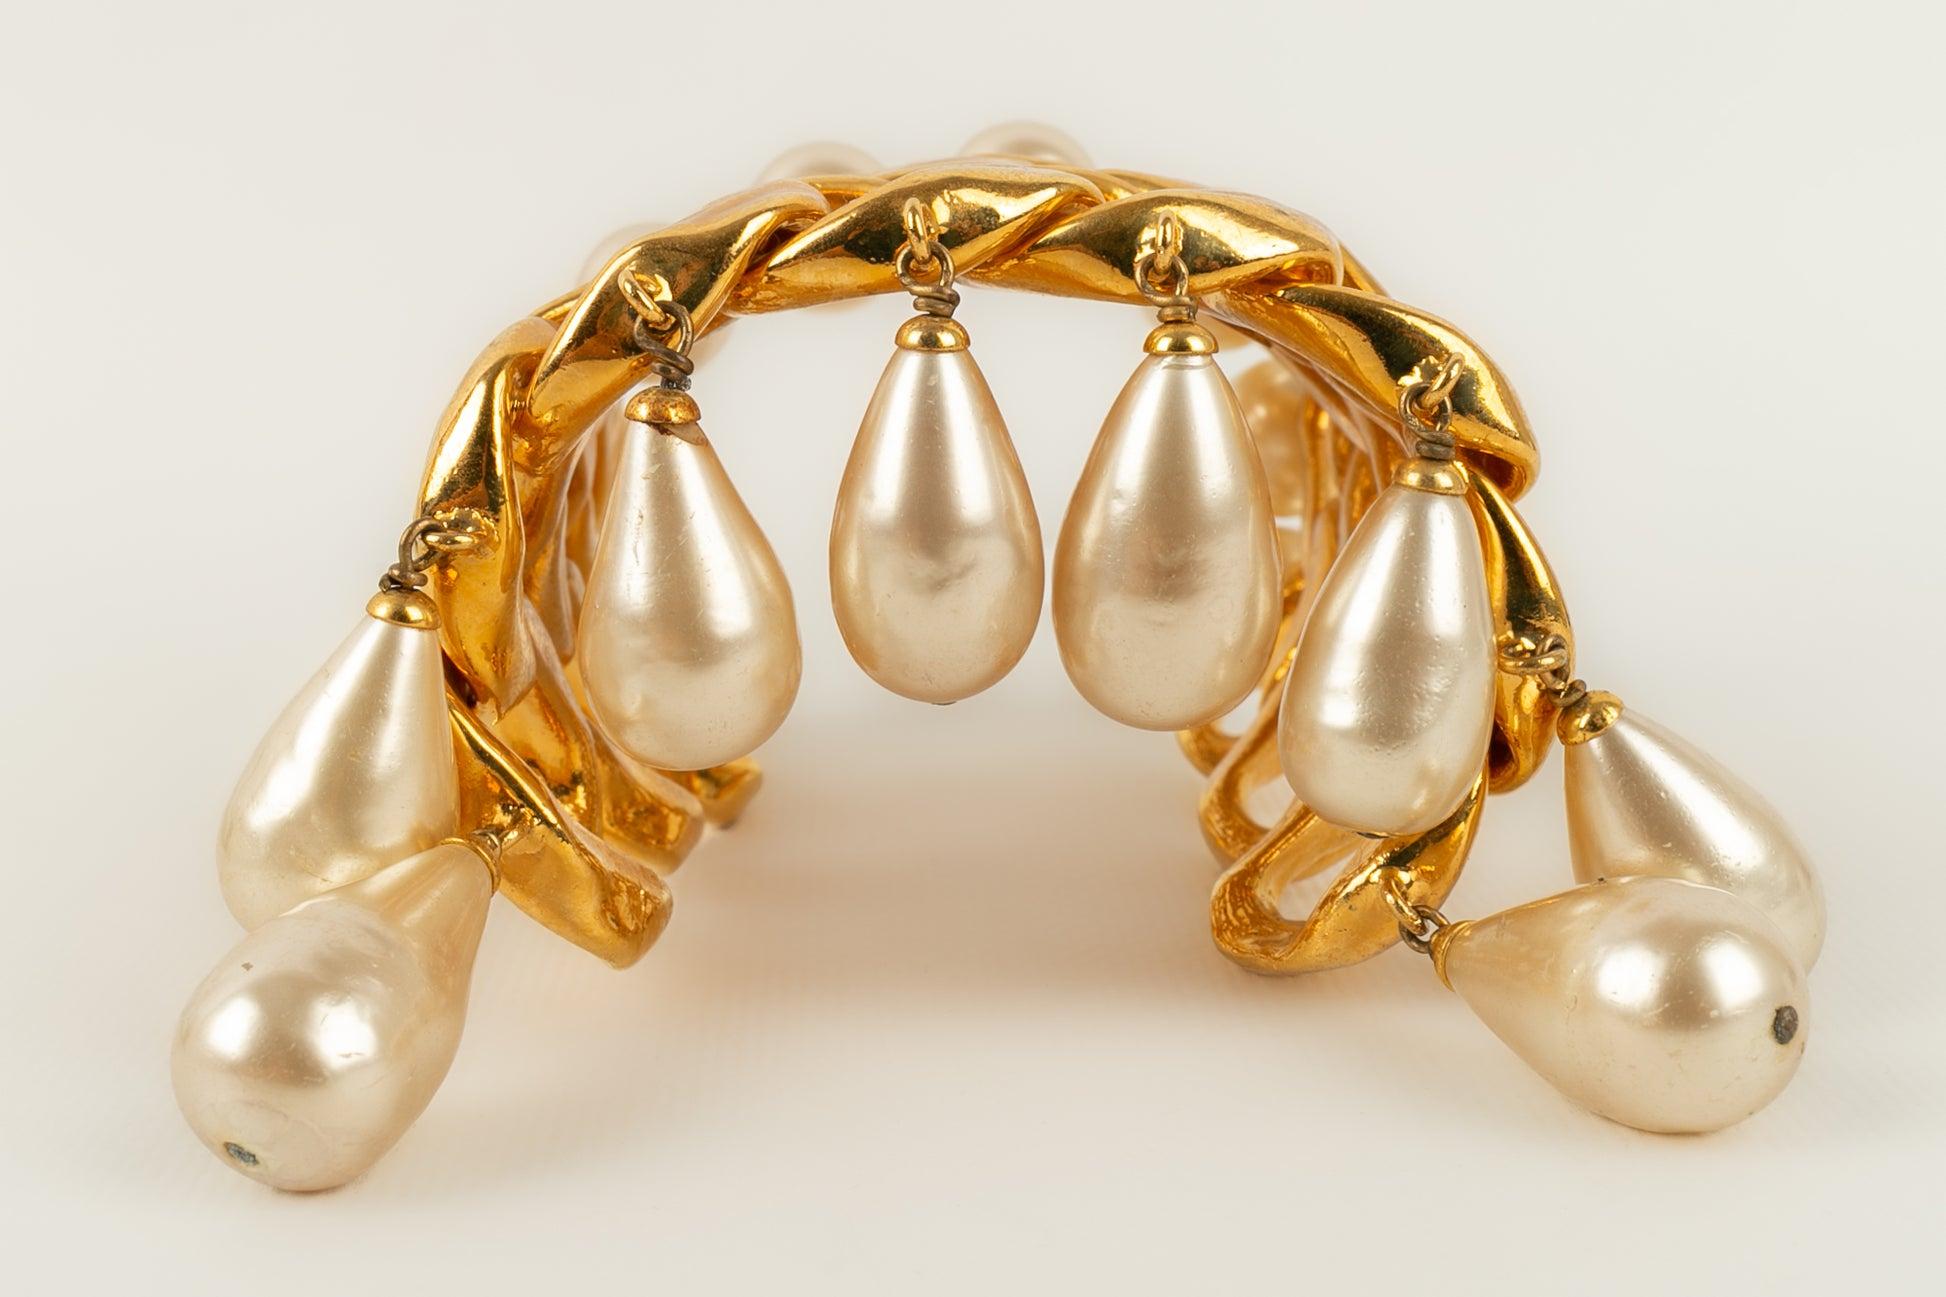 Chanel Cuff Bracelet in Golden Metal, Costume Pearls, and Pearly Drops In Good Condition For Sale In SAINT-OUEN-SUR-SEINE, FR